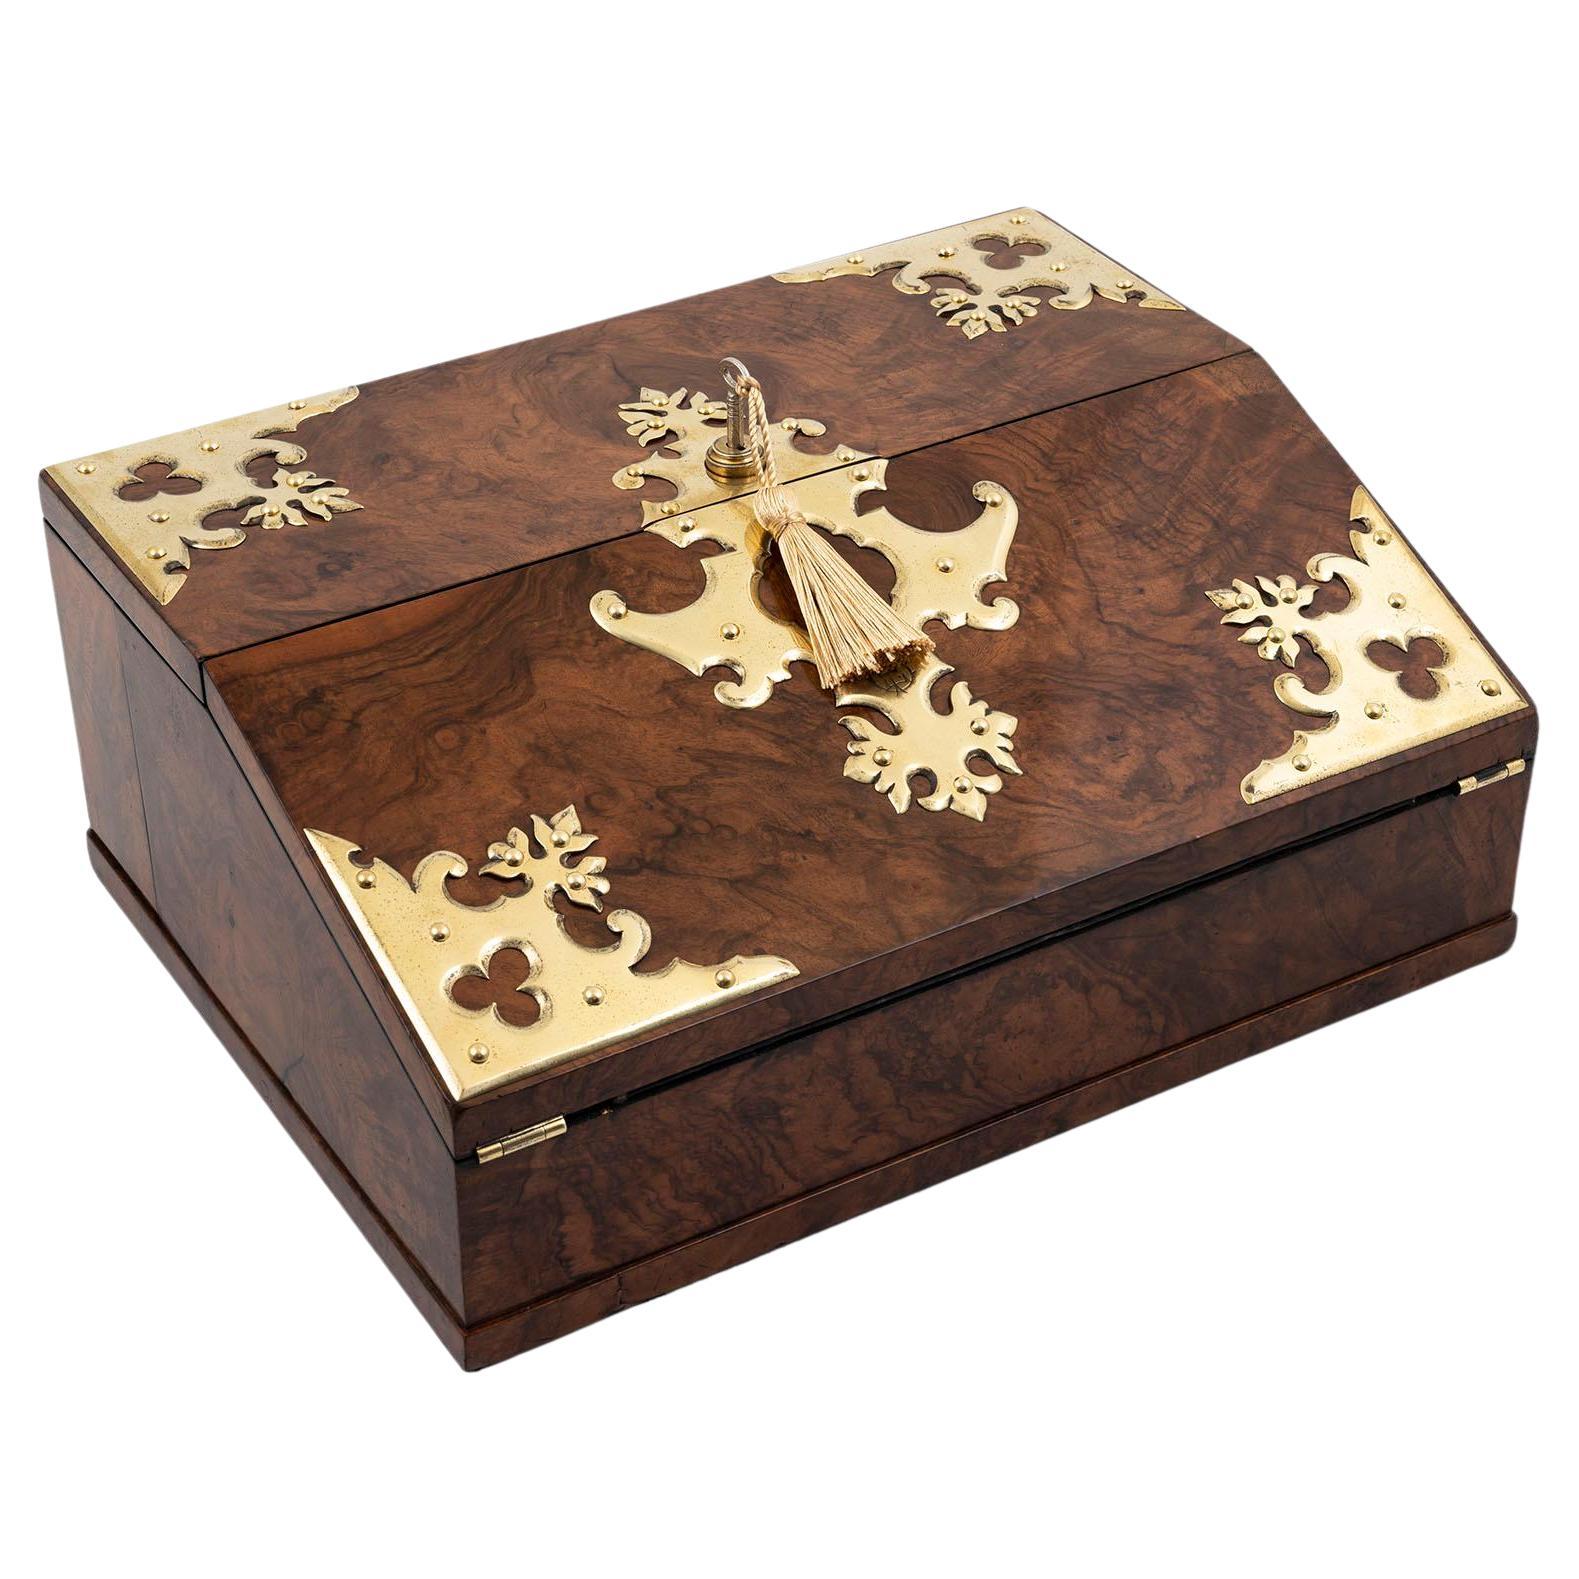 Retailed by Charles Henry, Manchester

From our Writing Box collection, we are delighted to offer this English Burr Walnut Writing Box by Betjemann. The Writing box of slim rectangular shape with a slightly sloped lid is veneered in exquisite Burr